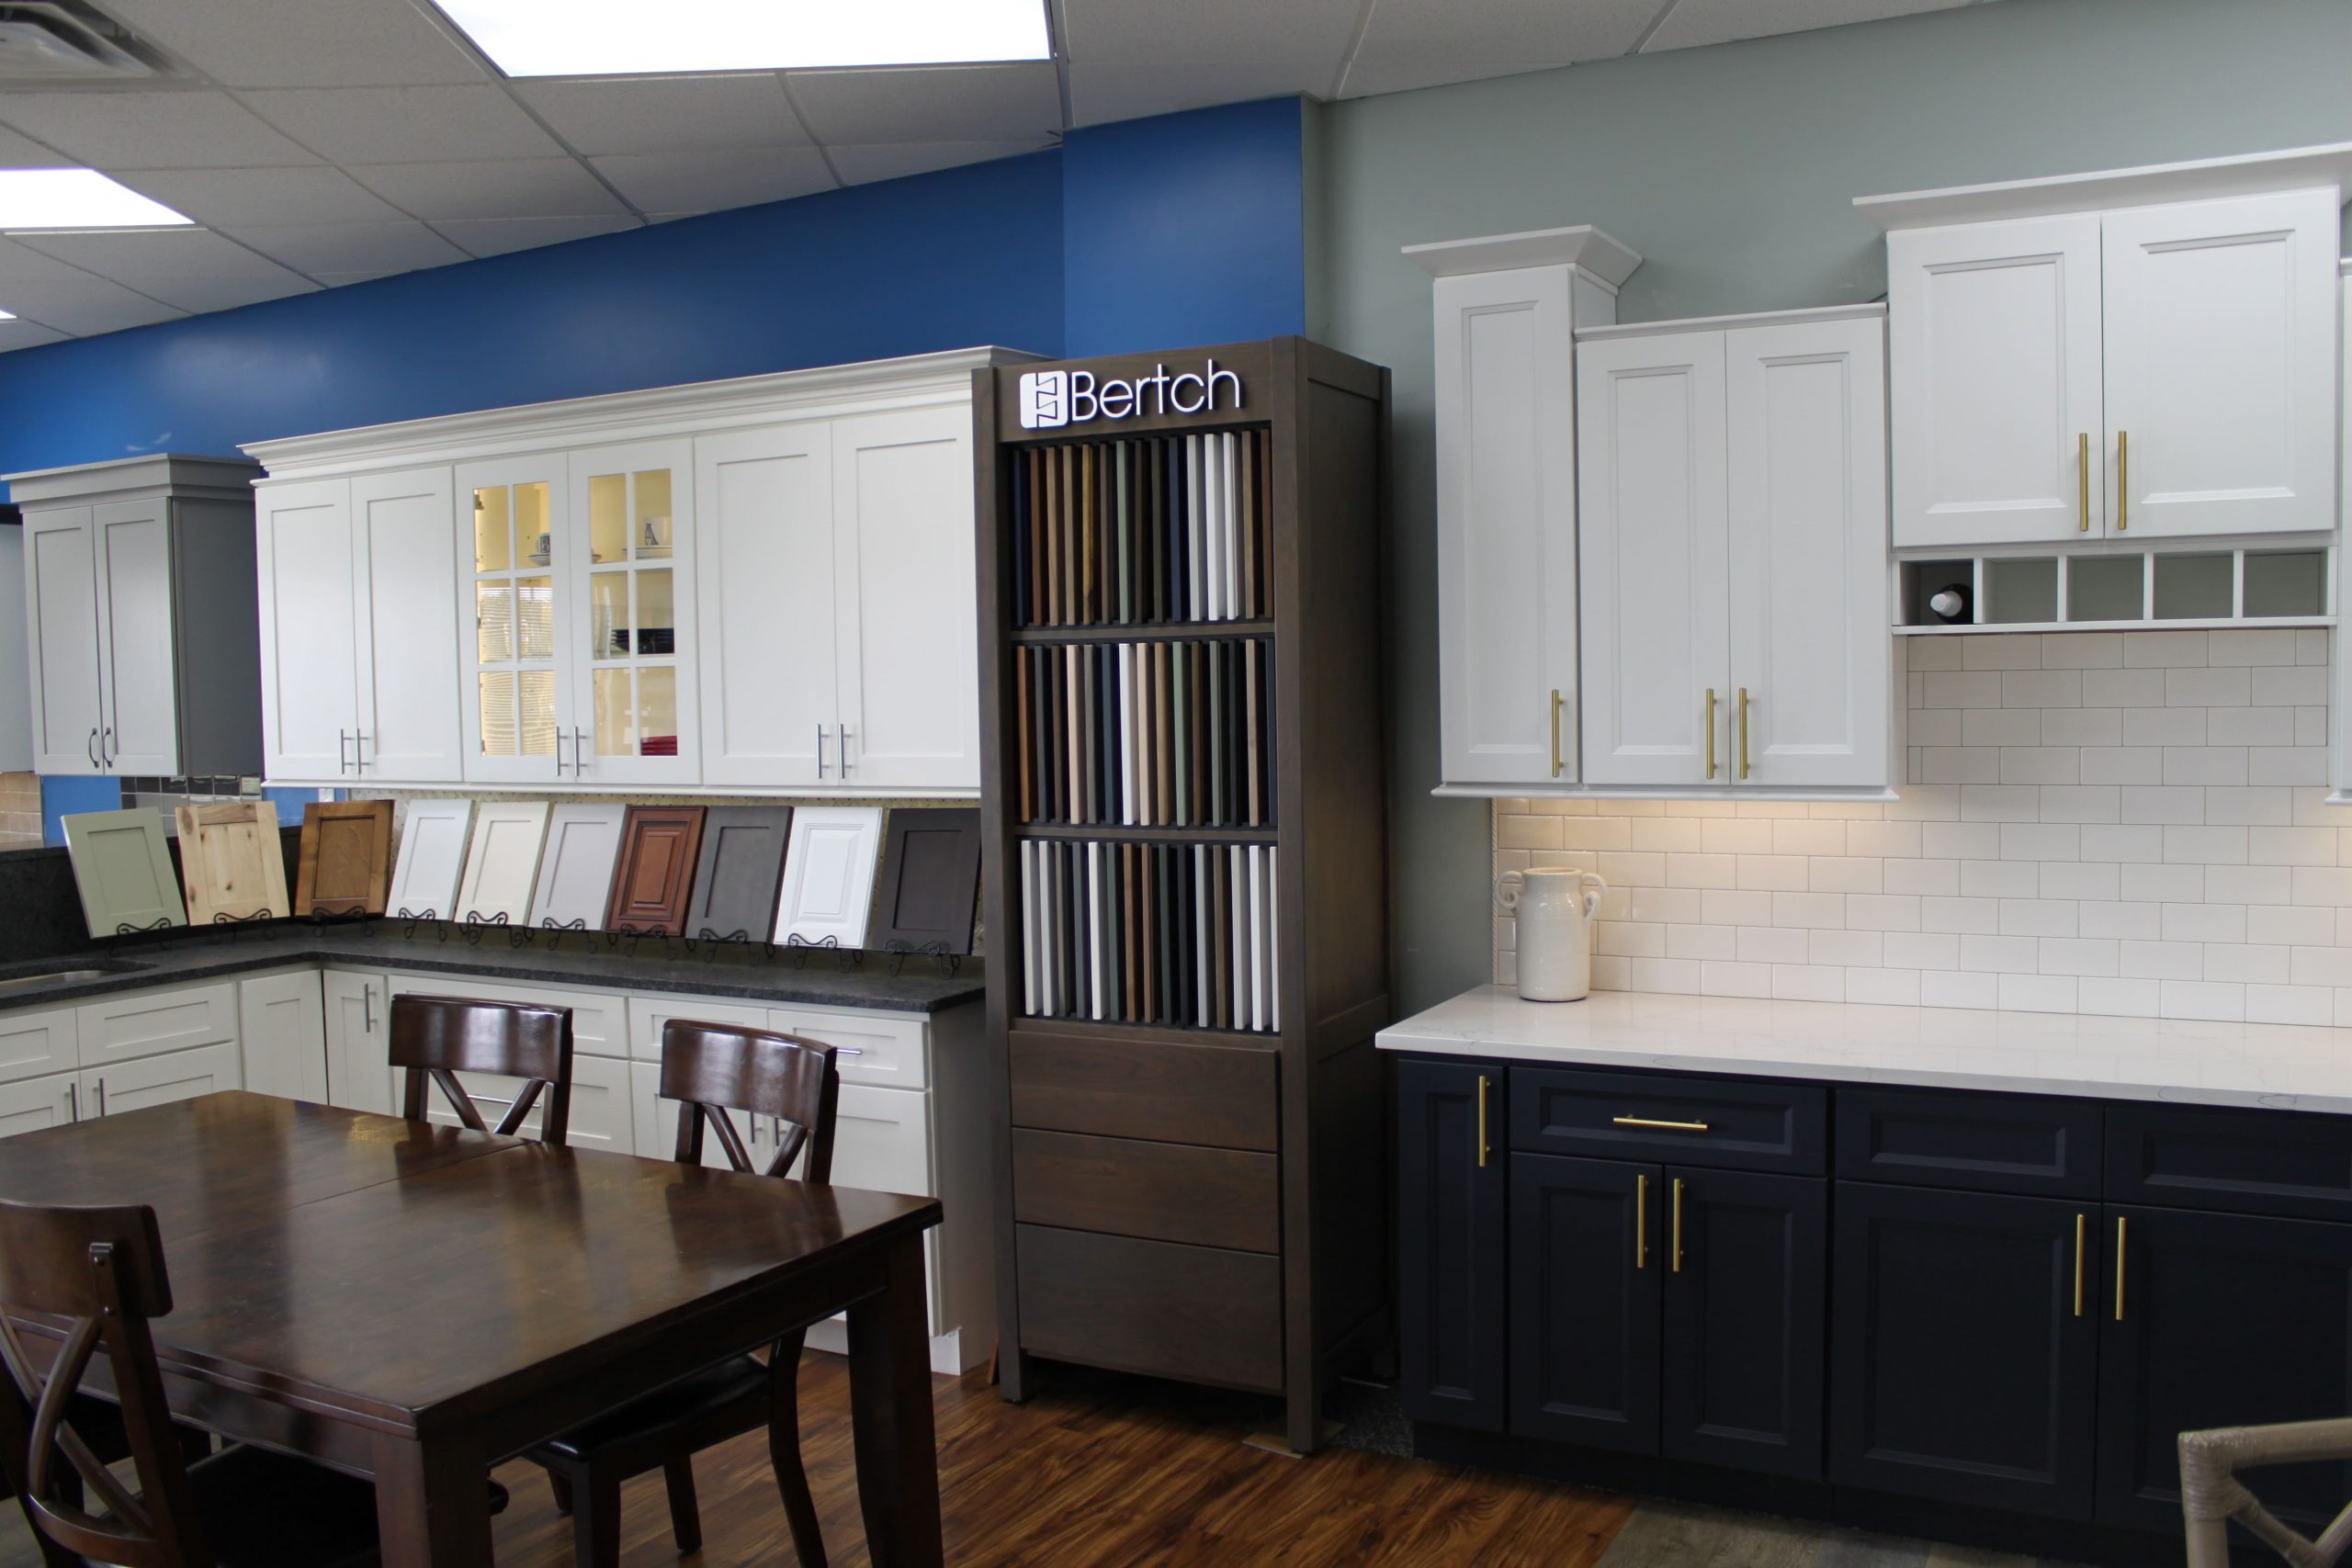 Fishers Indiana Boger Cabinetry